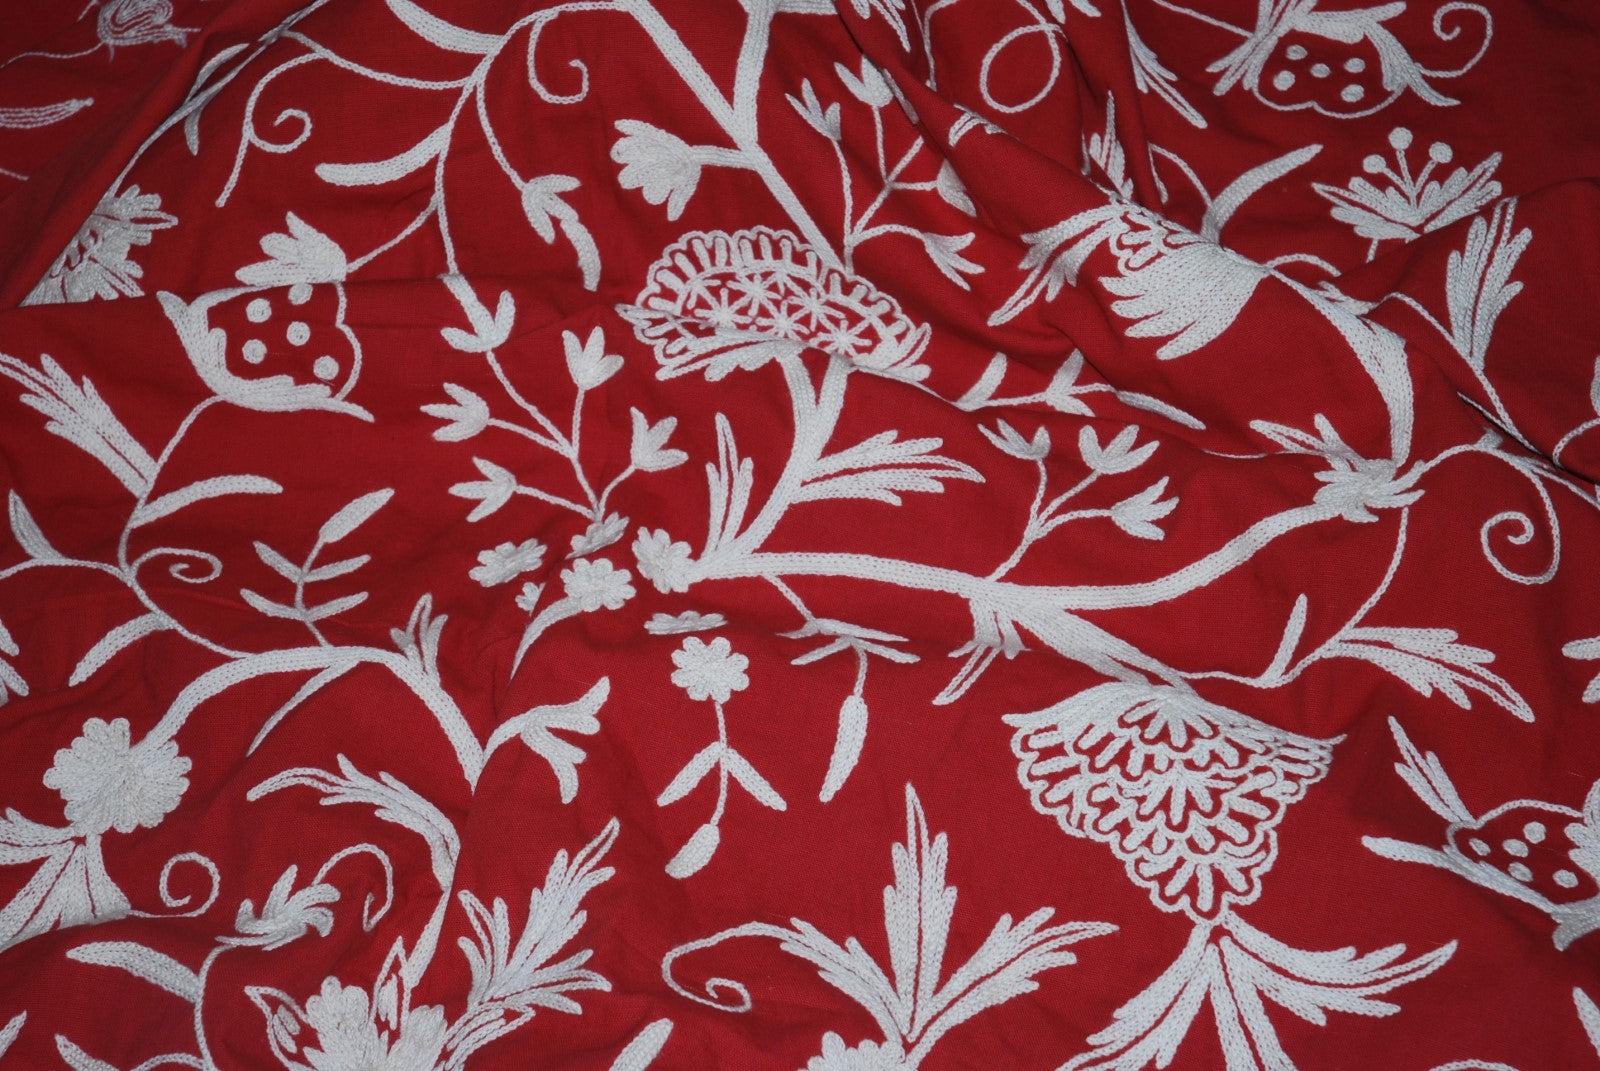 Cotton Crewel Embroidered Fabric Tree of Life, White on Red #DDR032